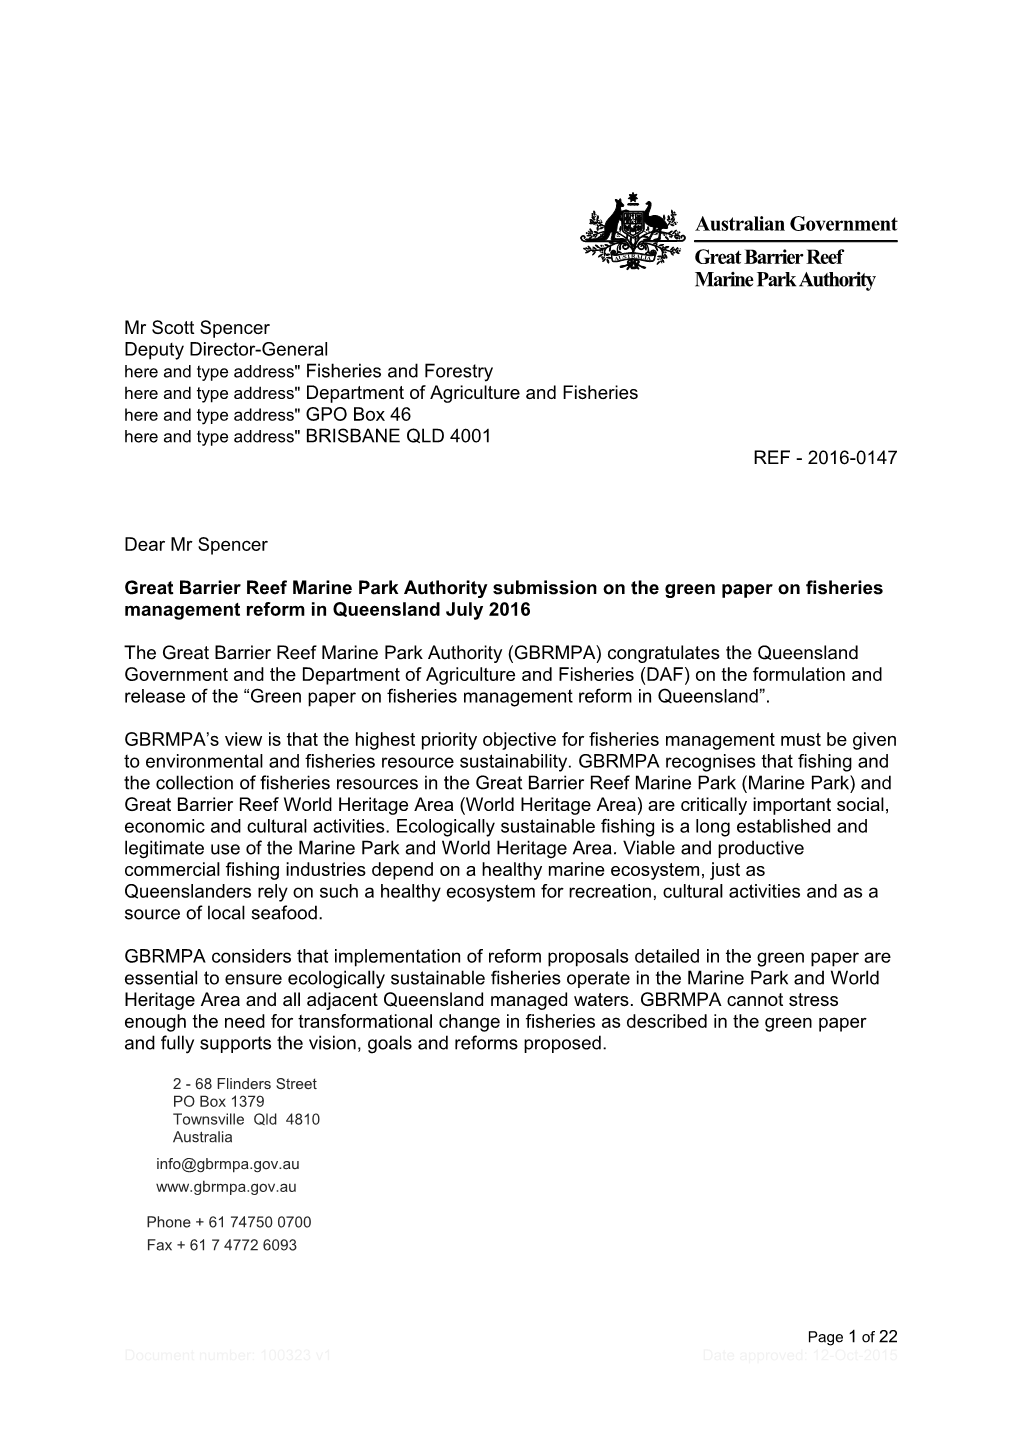 Great Barrier Reef Marine Park Authority Submission on the Green Paper on Fisheries Management